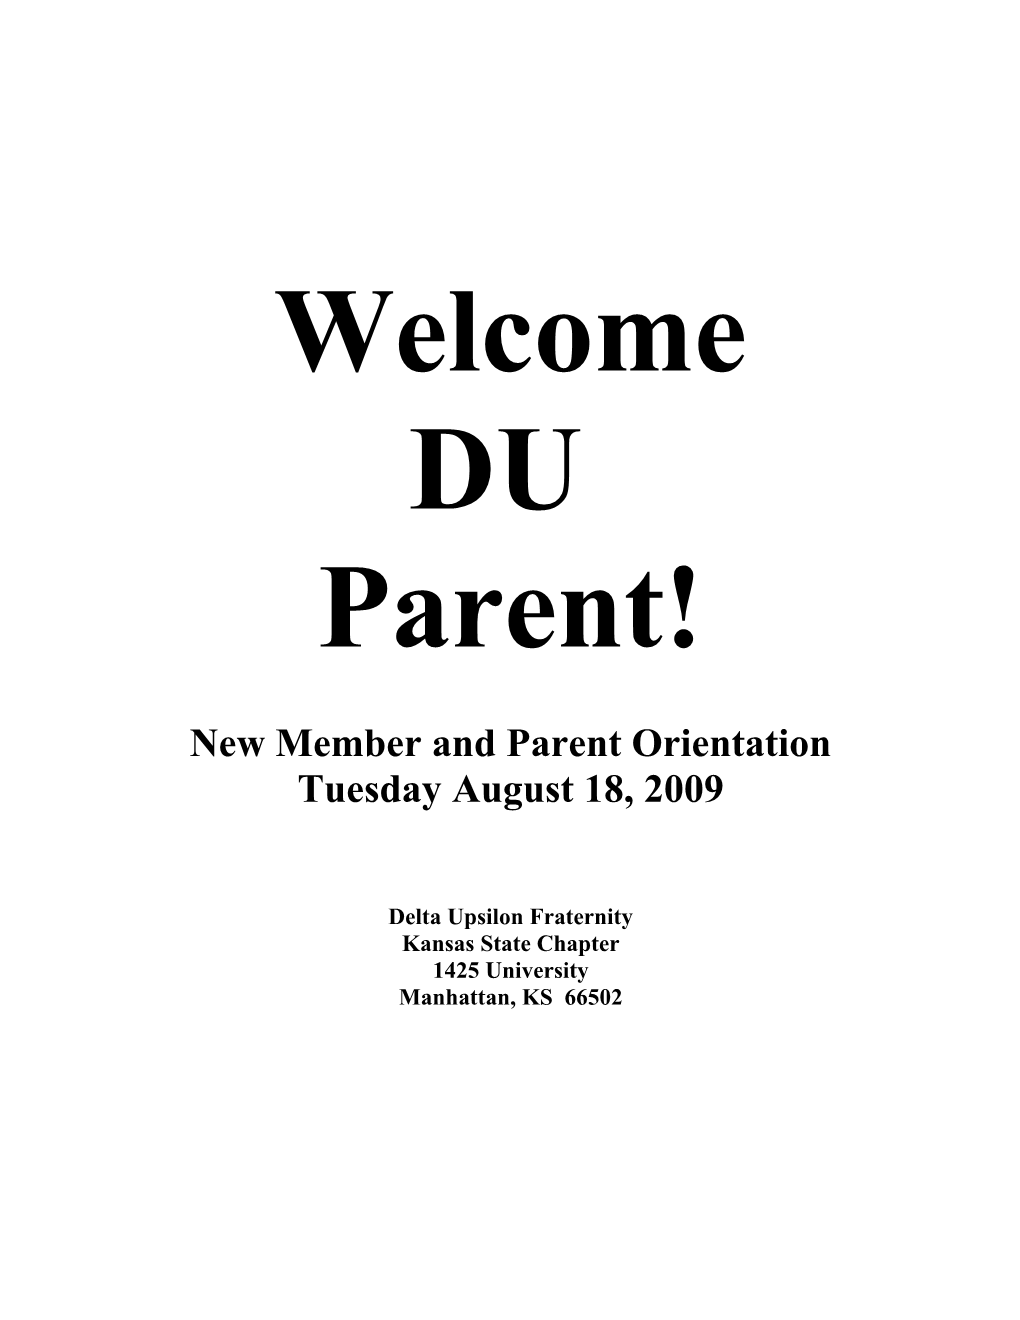 New Member and Parent Orientation